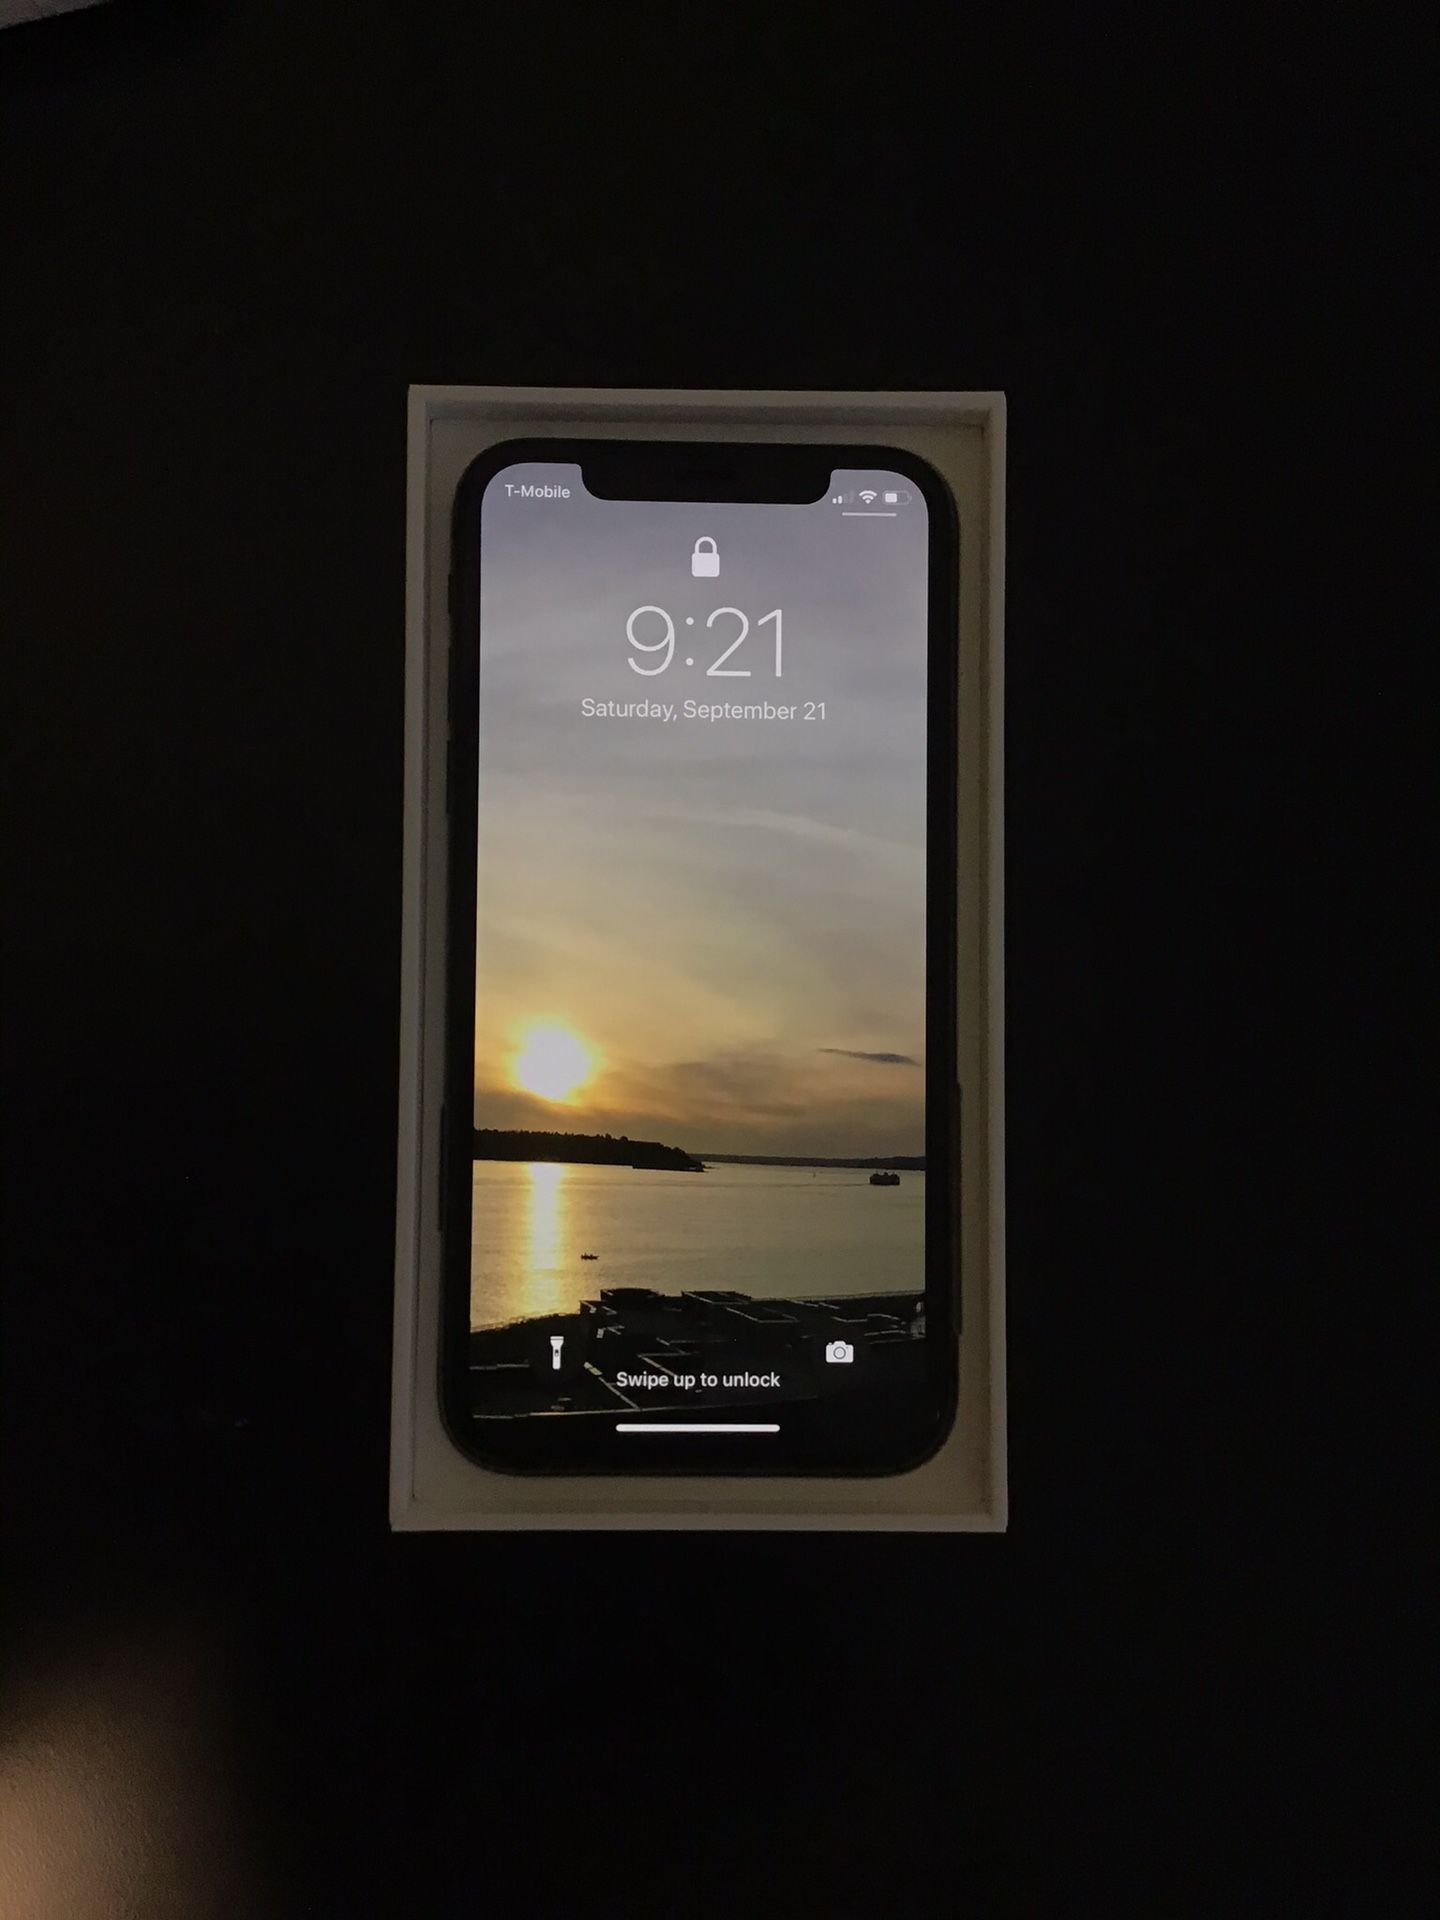 iPhone X 256GB Factory Unlocked. Original packaging and accessories never used. w/Free new case